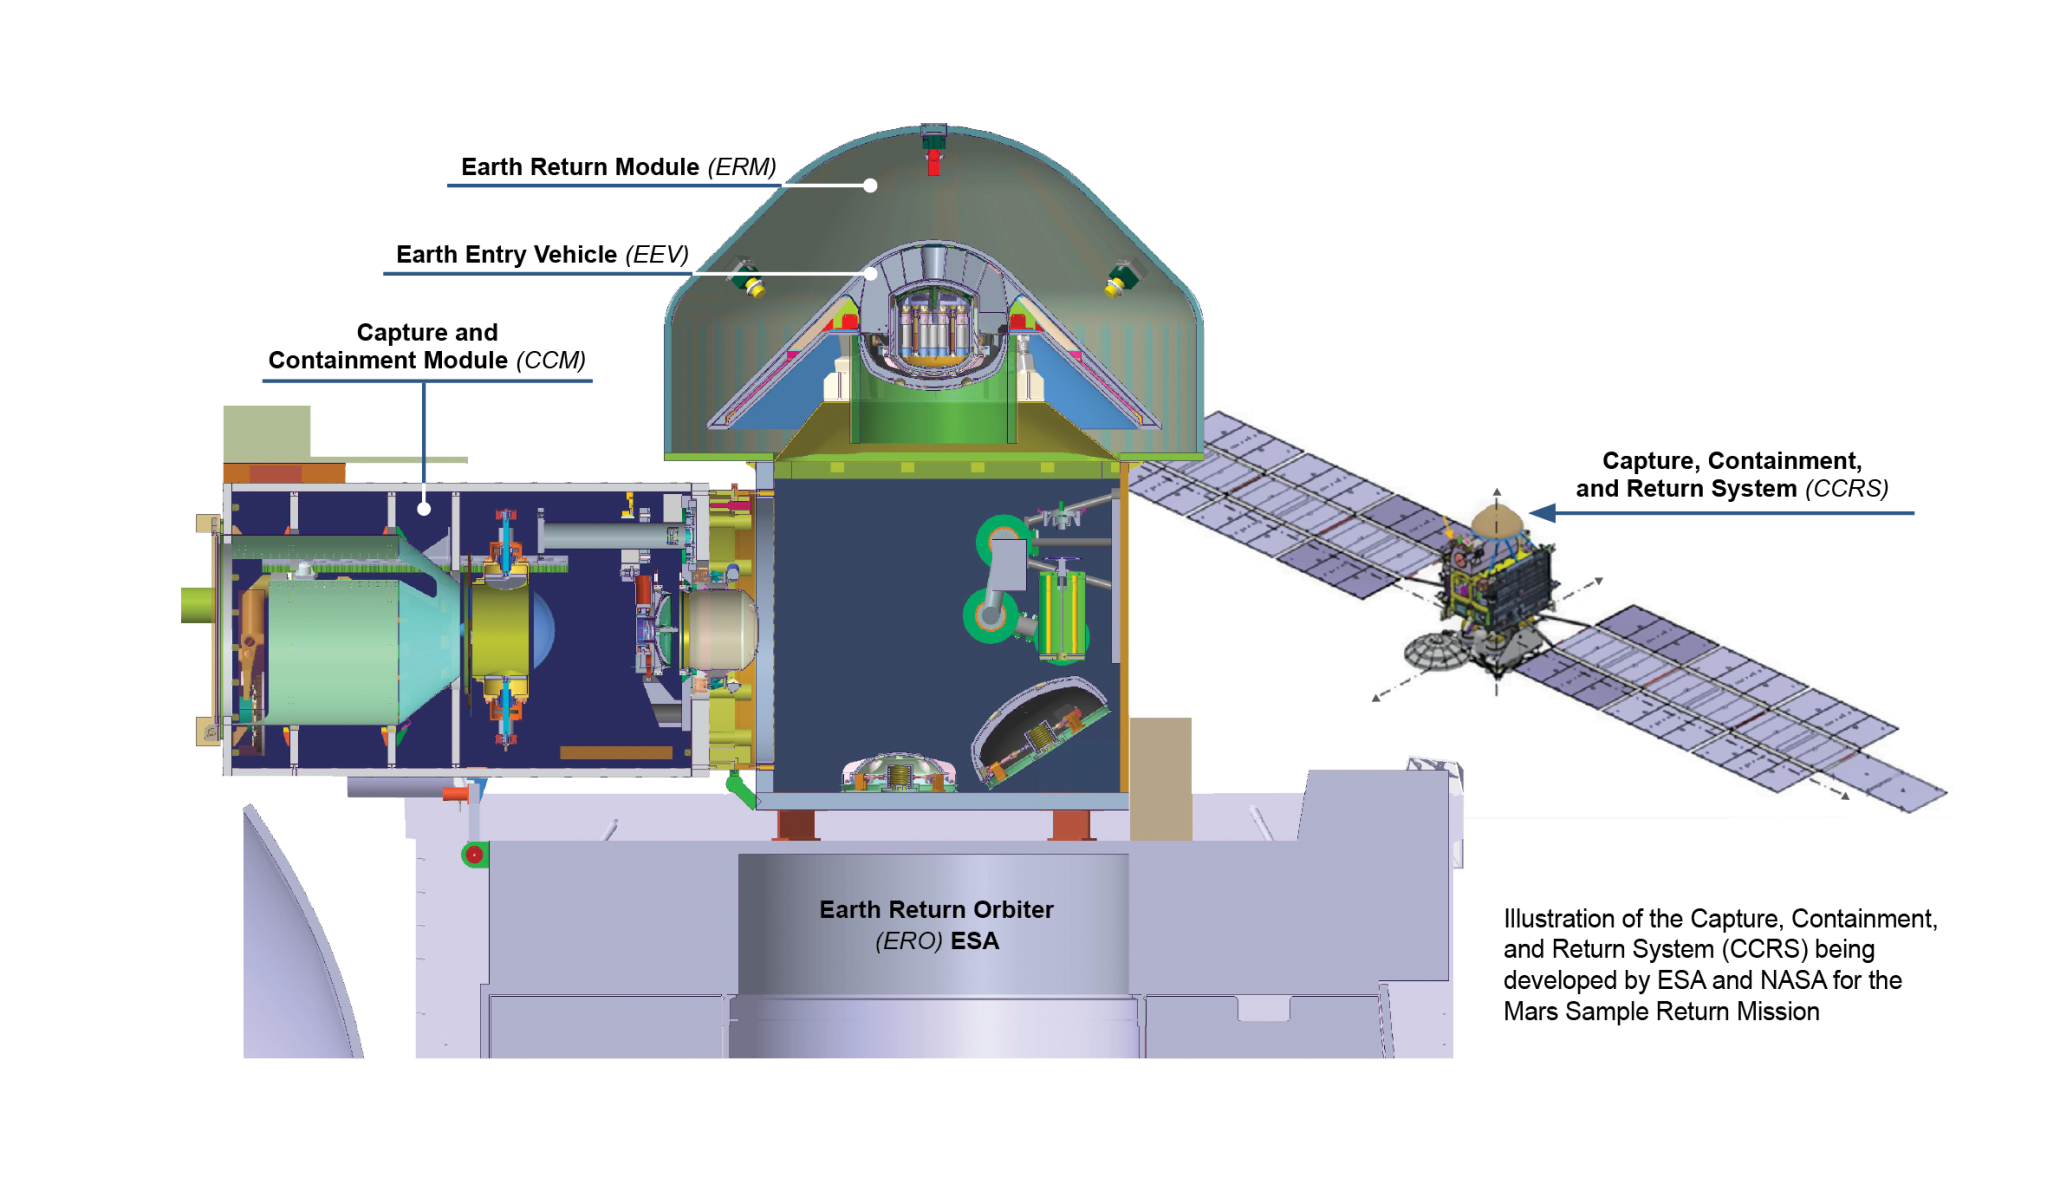 Illustration of the Capture, Containment, and Return System (CCRS) being developed by ESA and NASA for the Mars Sample Return Mission